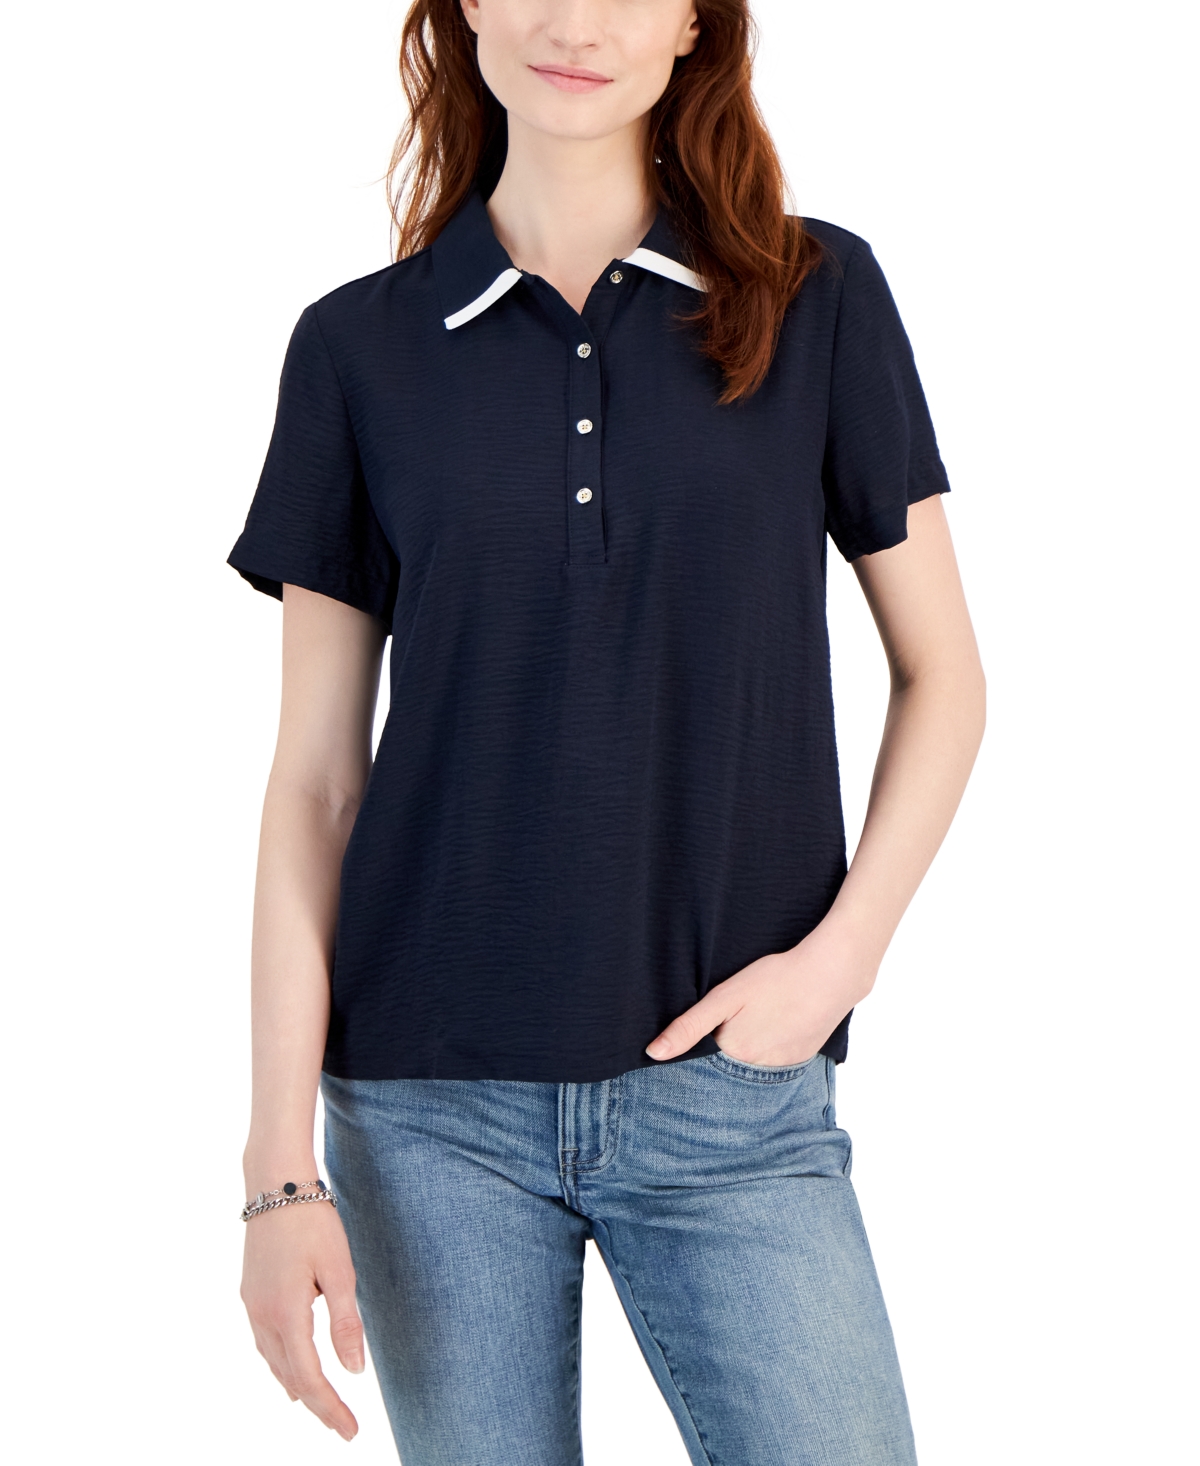 TOMMY HILFIGER WOMEN'S COLLARED SHORT-SLEEVE POLO TOP